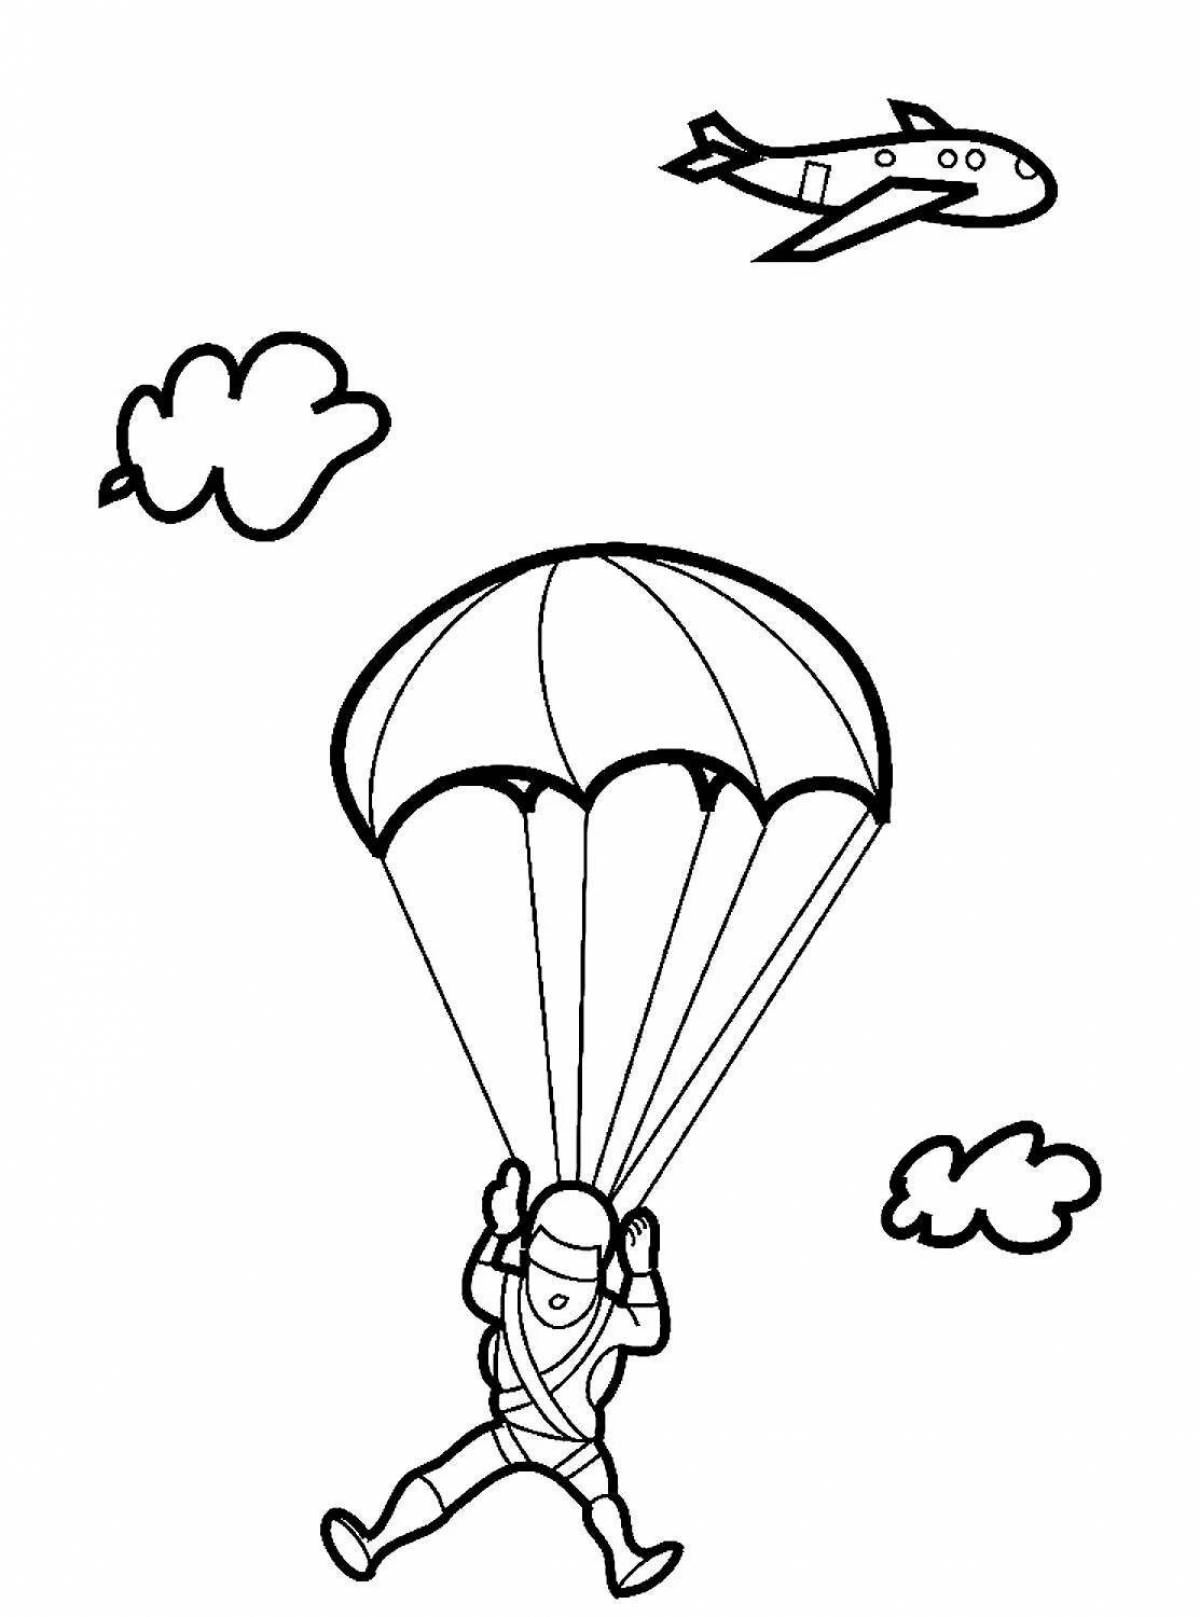 A fun skydiver coloring book for kids